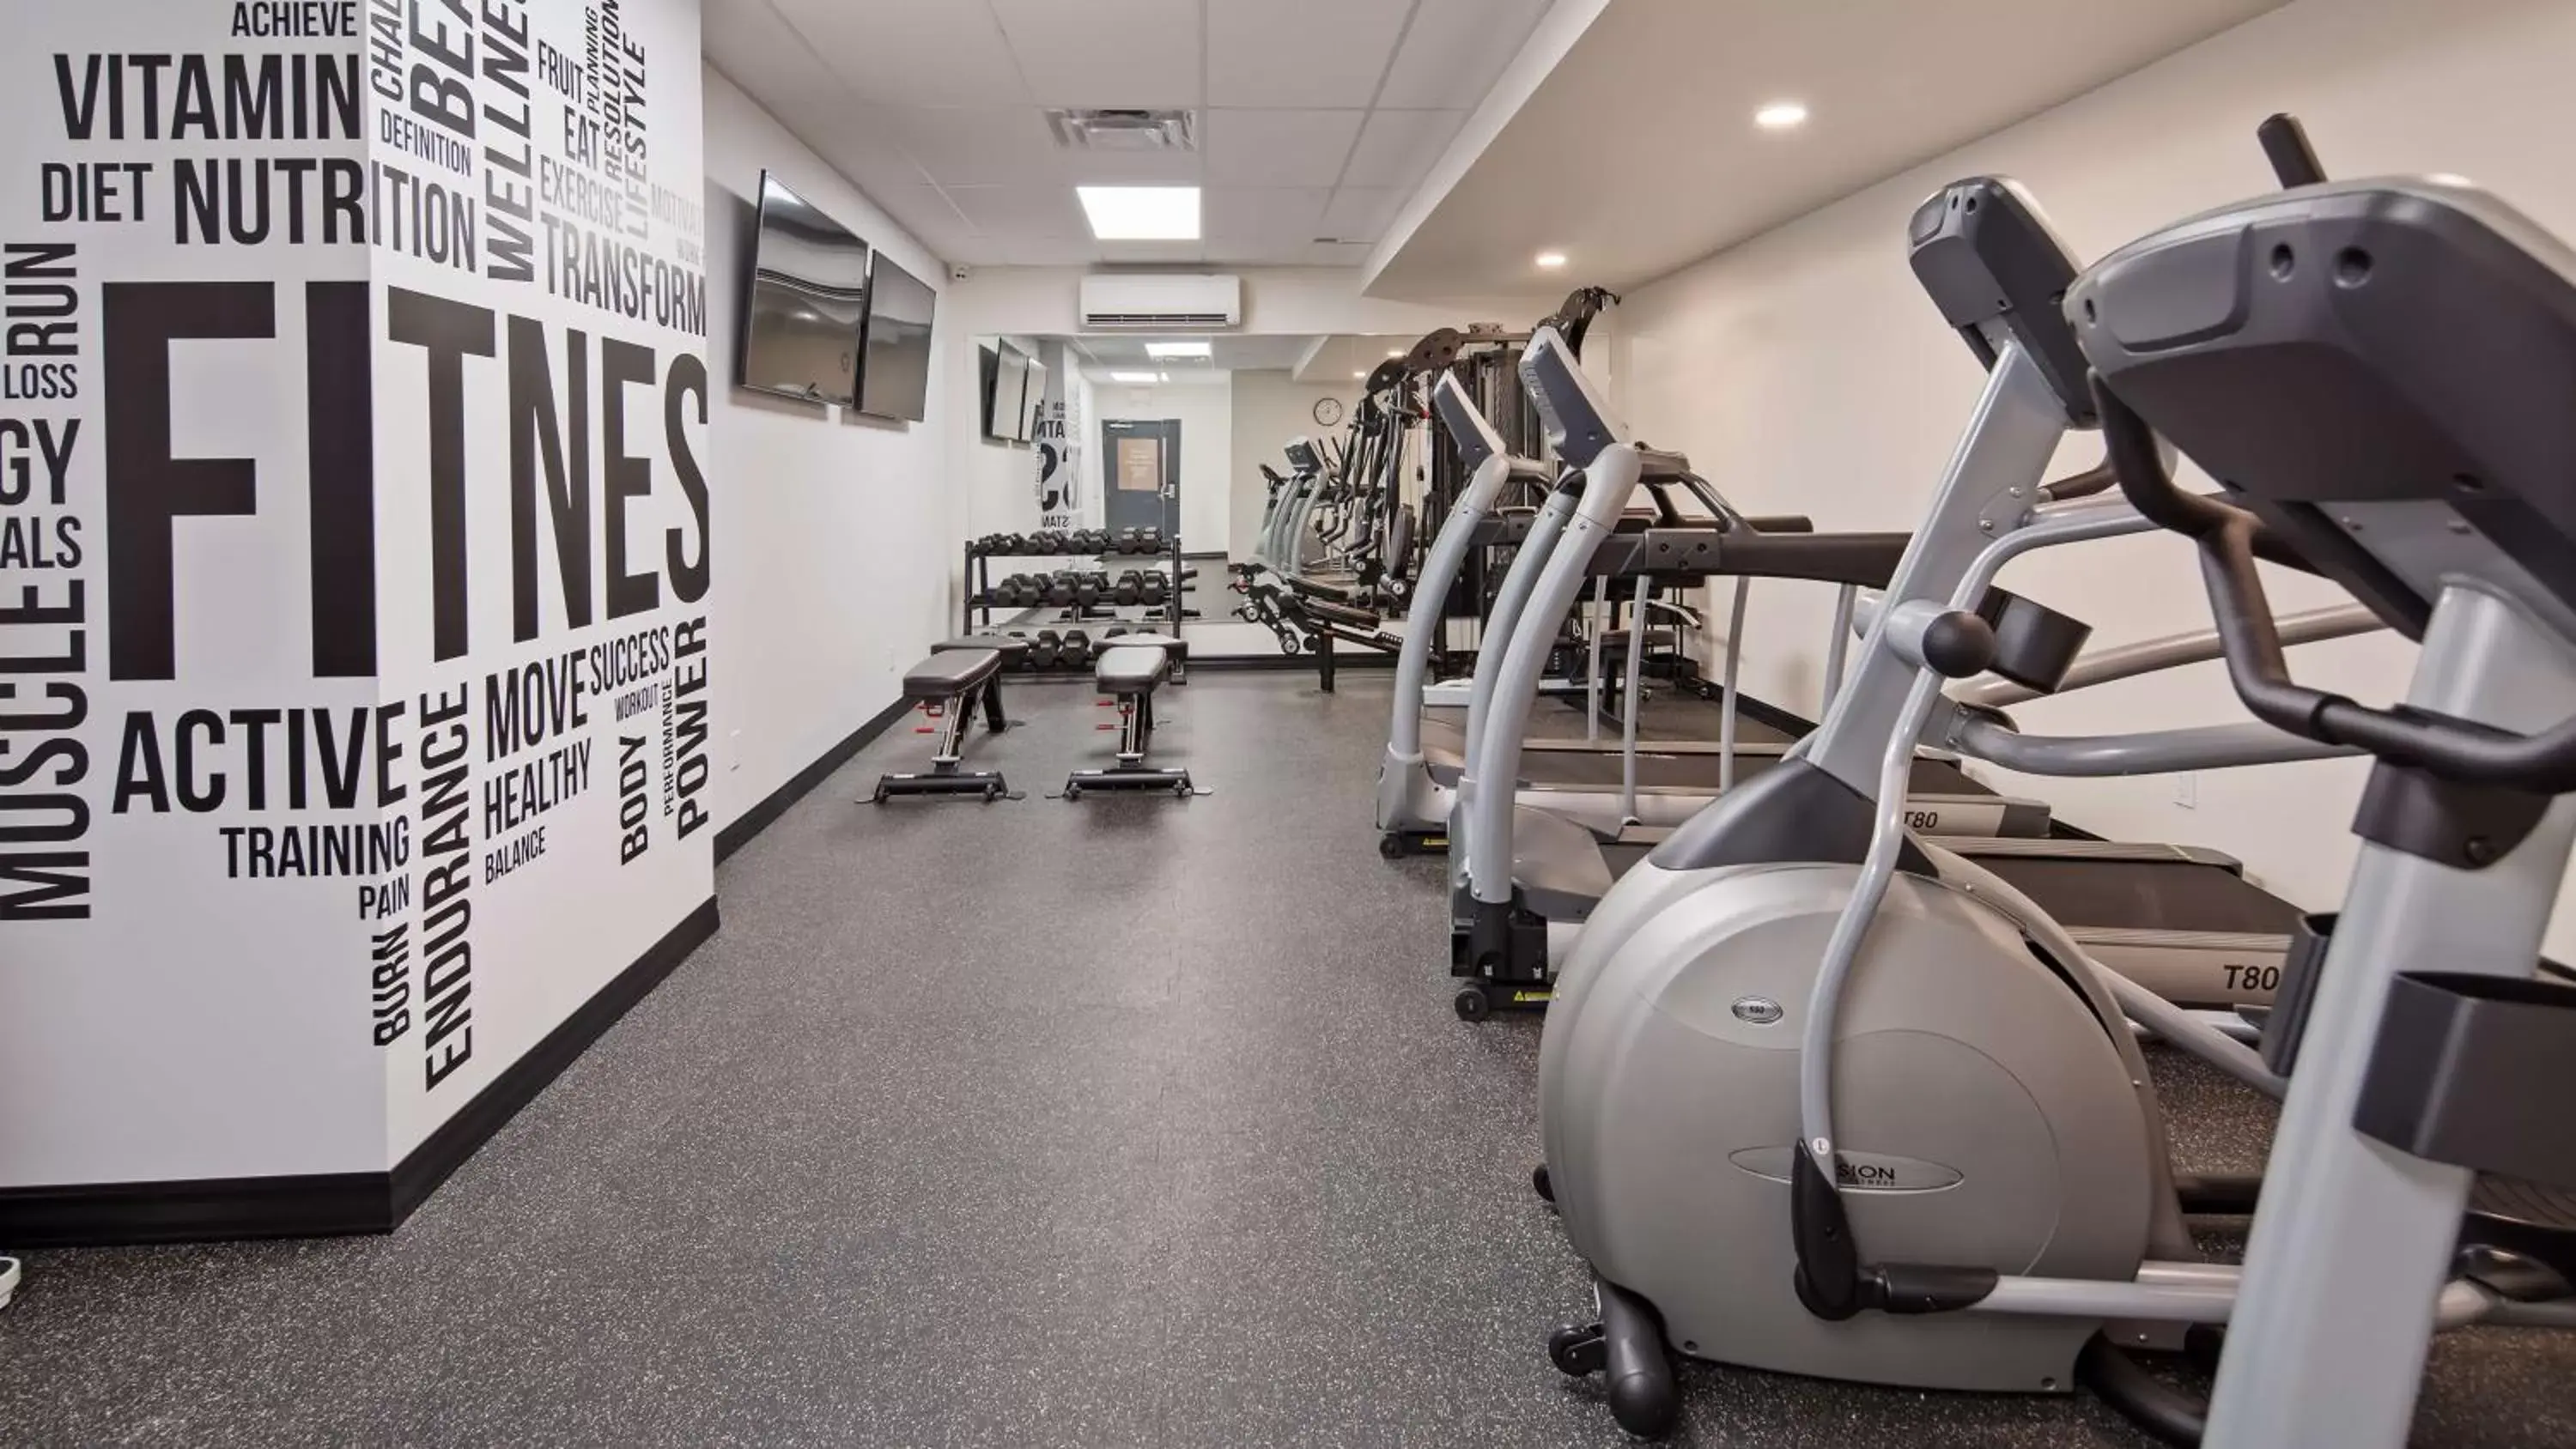 Fitness centre/facilities, Fitness Center/Facilities in Best Western Plus Morden